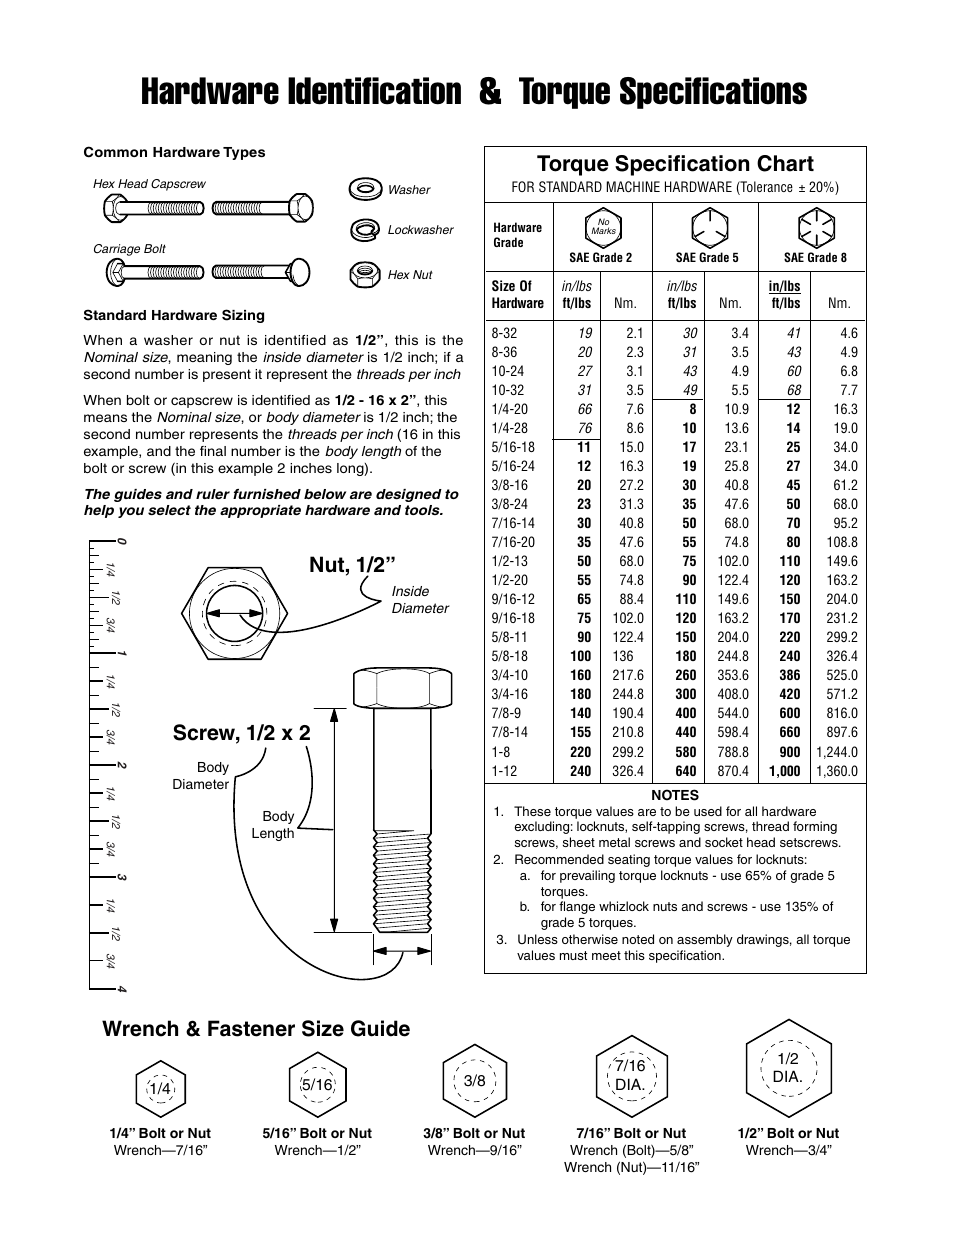 Torque Specification Chart